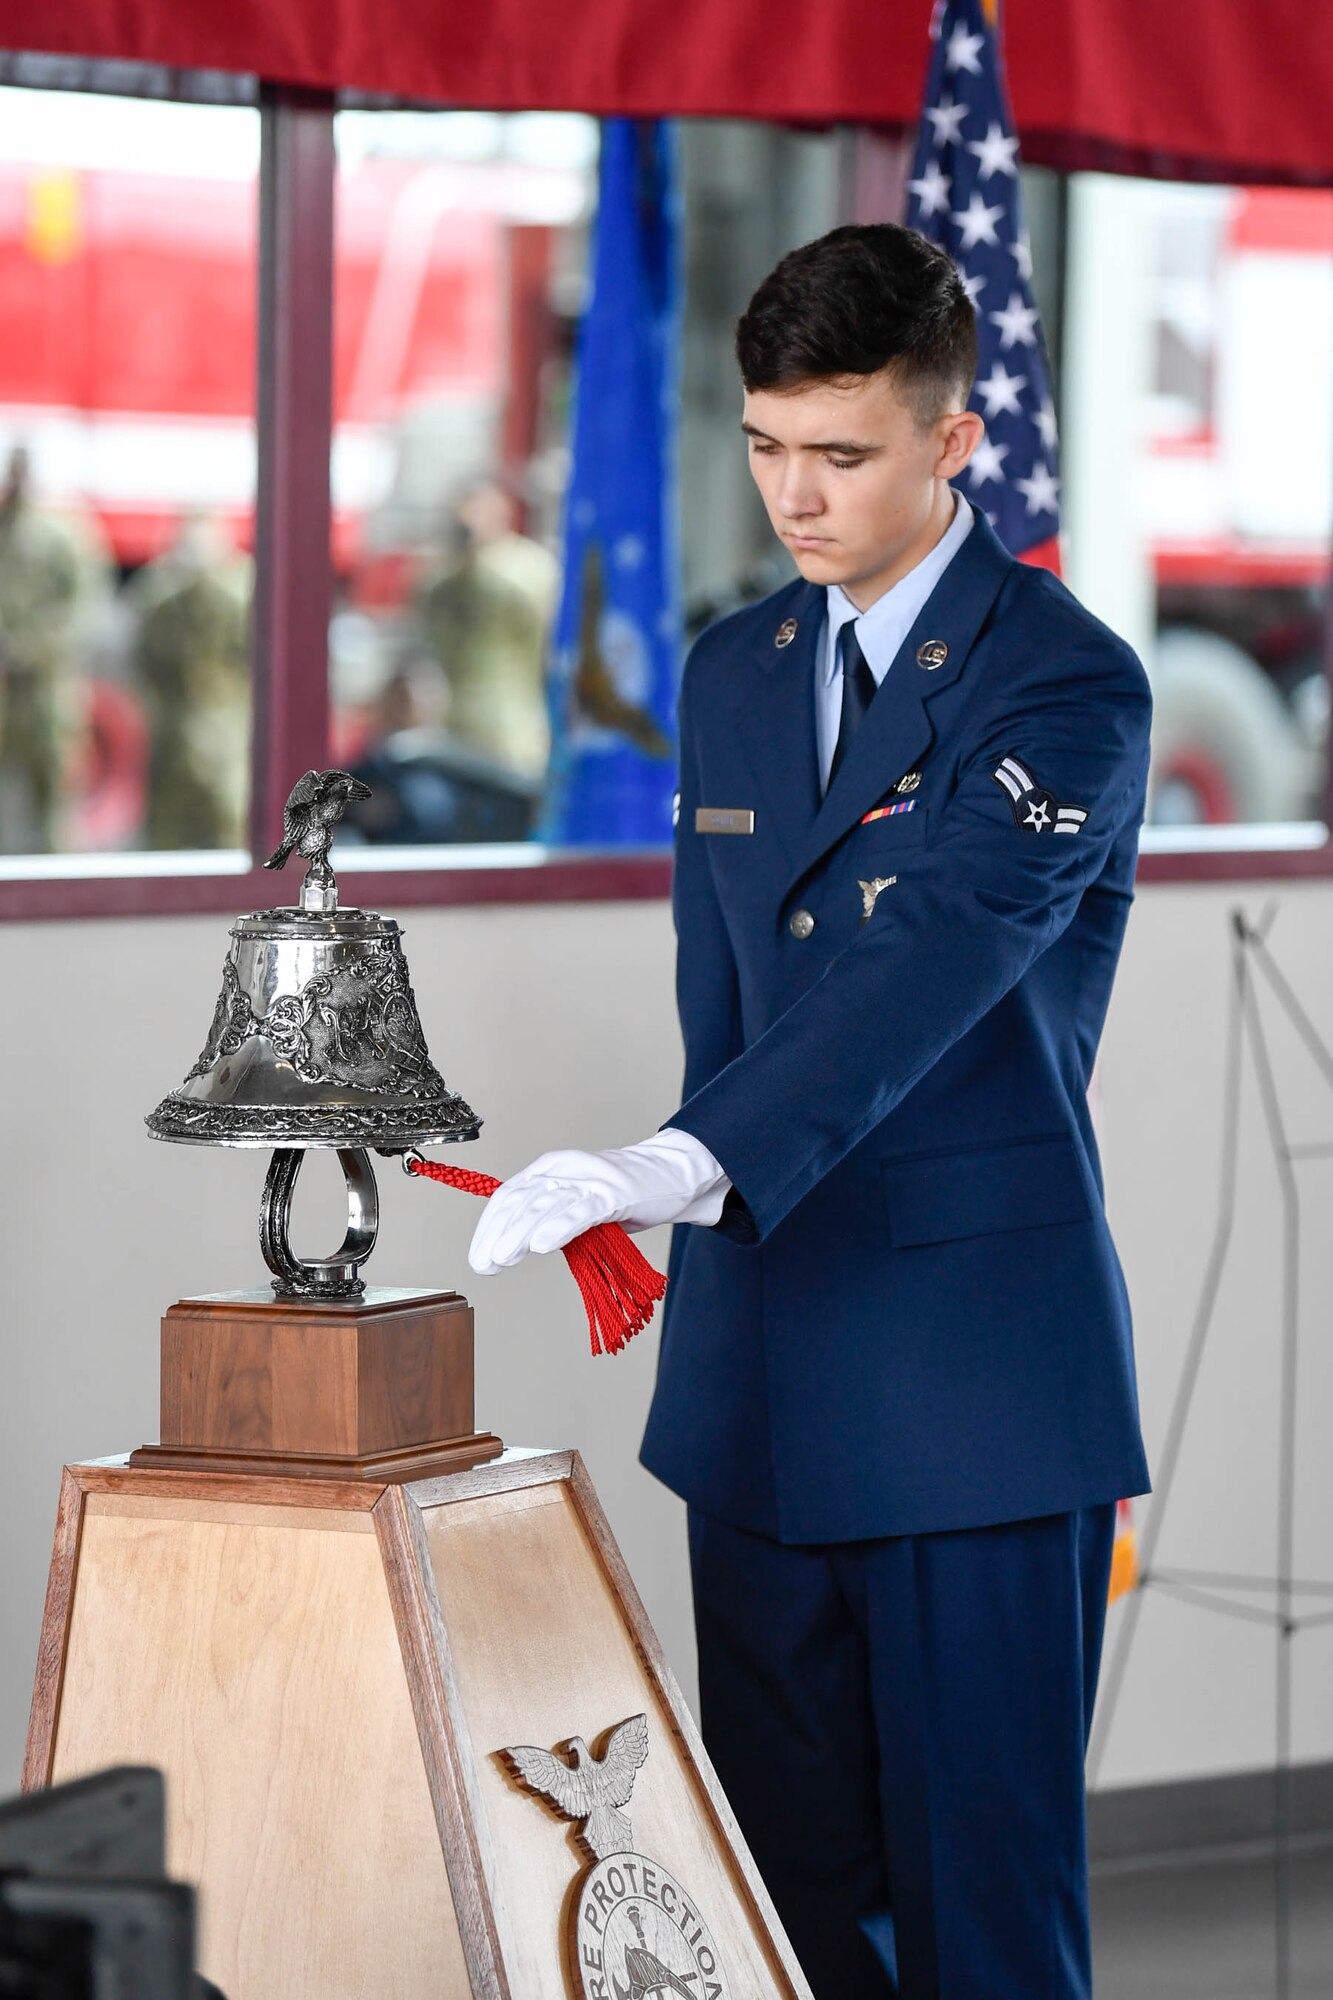 Airman 1st Class Devin Oliver, 436th Civil Engineer Squadron fire protection apprentice, performs the ringing of the bell ceremony during the 19th Anniversary 9/11 memorial event Sept. 11, 2020, at Dover Air Force Base, Delaware. The ringing of the “four fives” is a firefighter tradition that signals and honors when a firefighter has perished in the line of duty. (U.S. Air Force photo by Mauricio Campino)